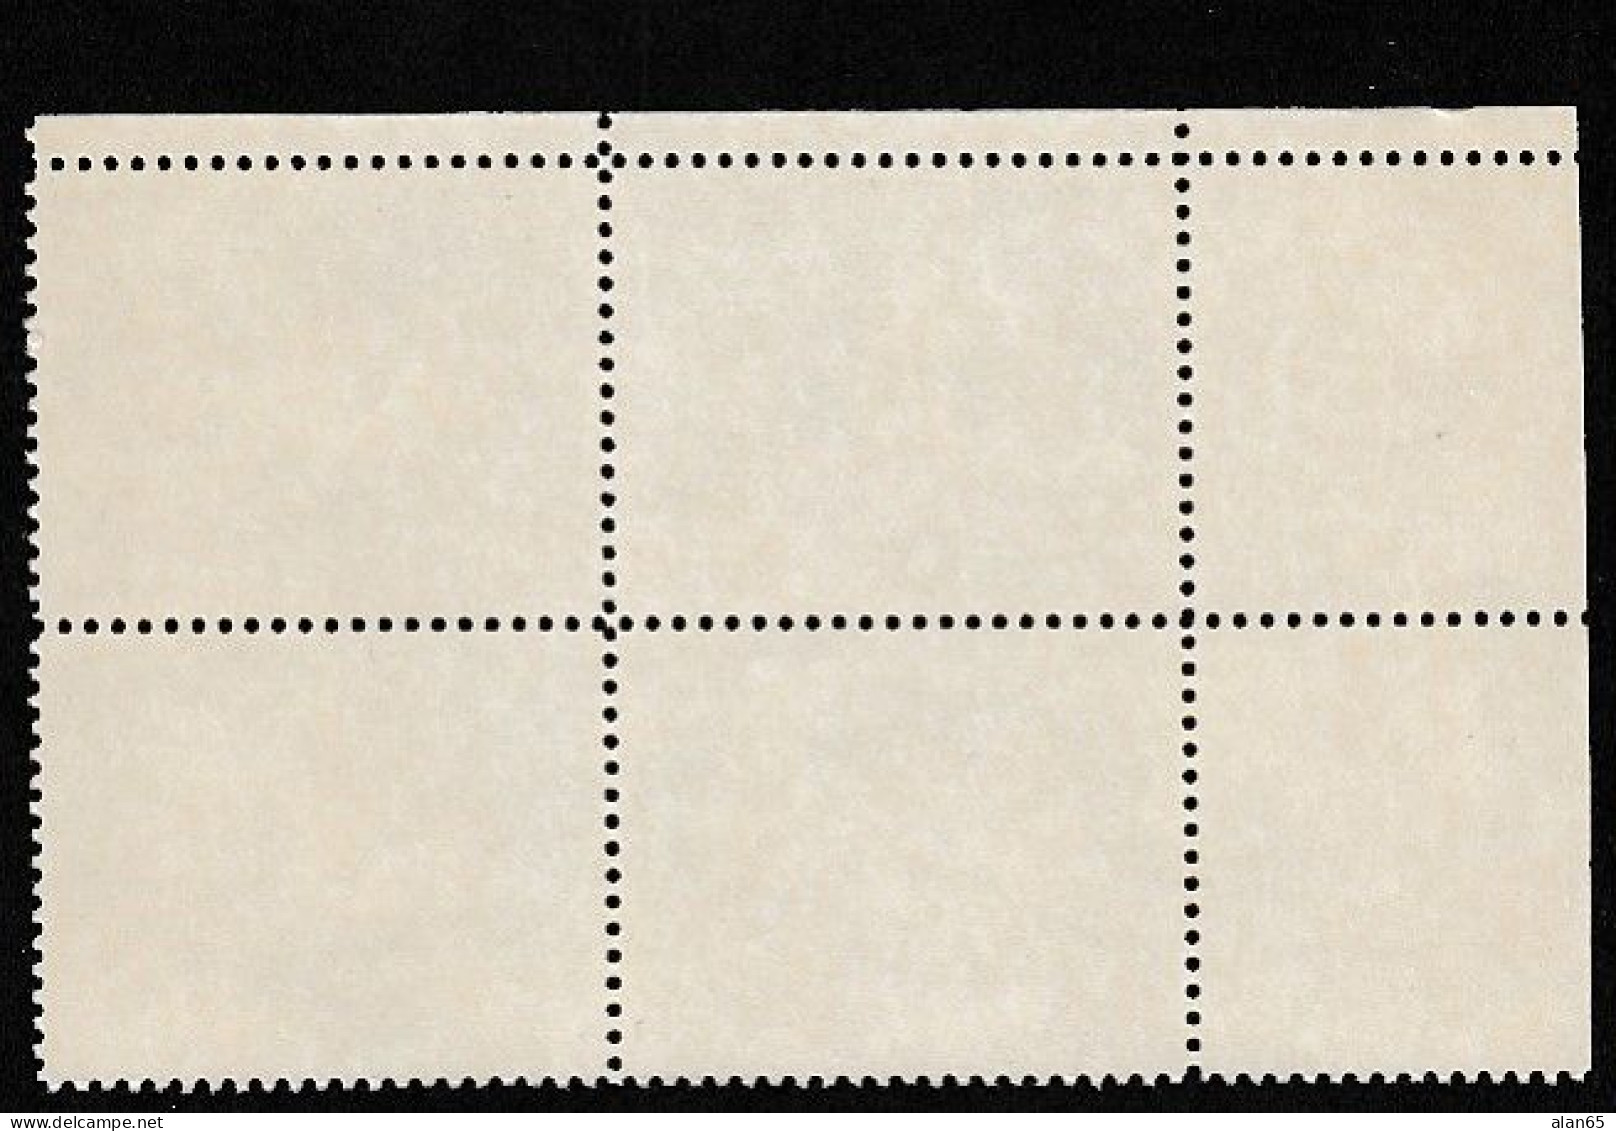 Sc#2420, Letter Carriers 25-cent 1989 Issue, Plate # Block Of 4 MNH US Postage Stamps - Numéros De Planches